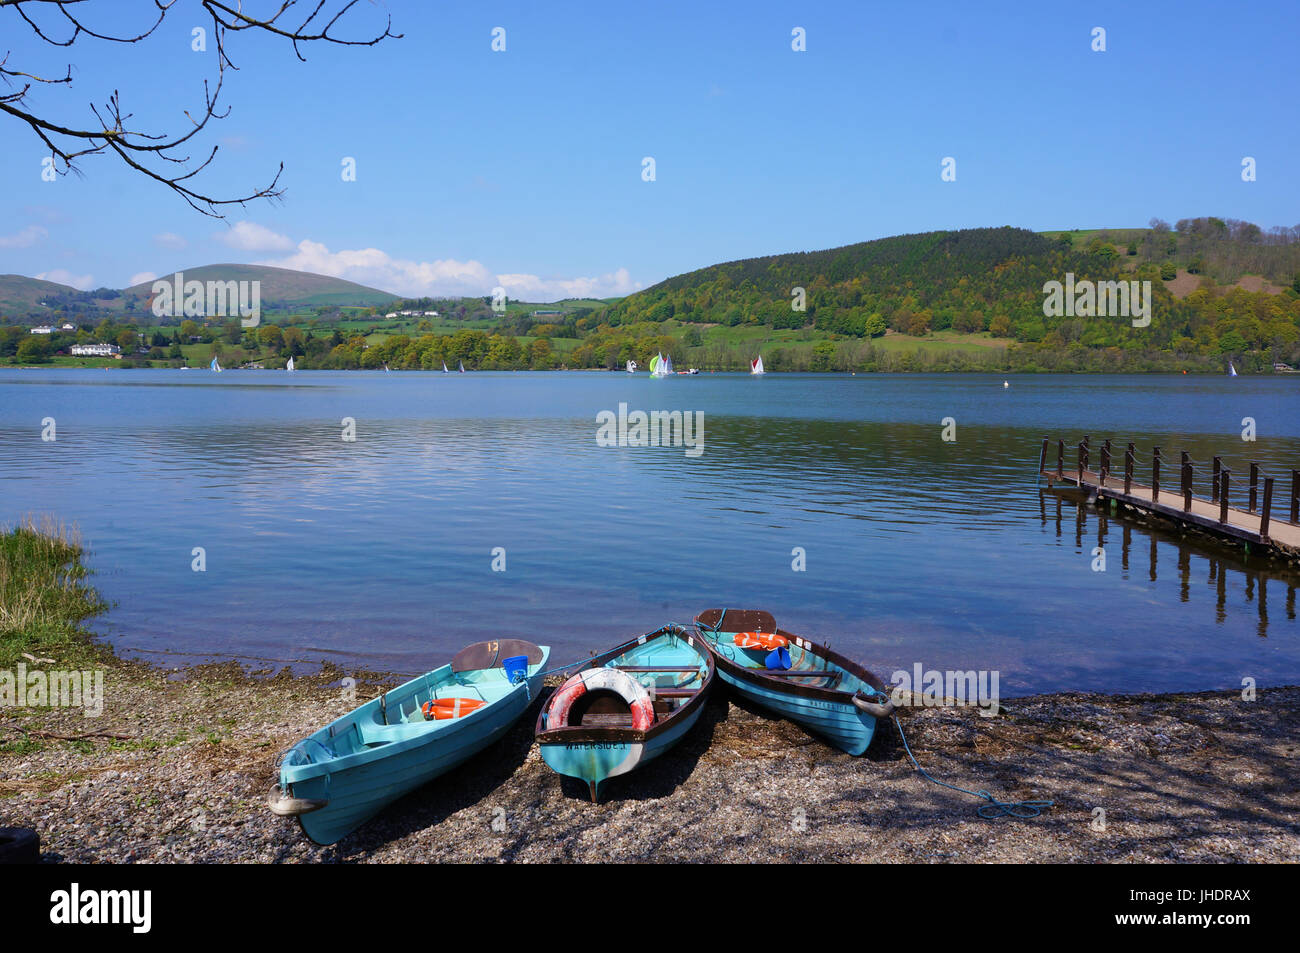 Ullswater lake on sunny day with clear blue sky.  Three rowing boats on lakeside next to small pier. View over hills, Lake District England. Stock Photo